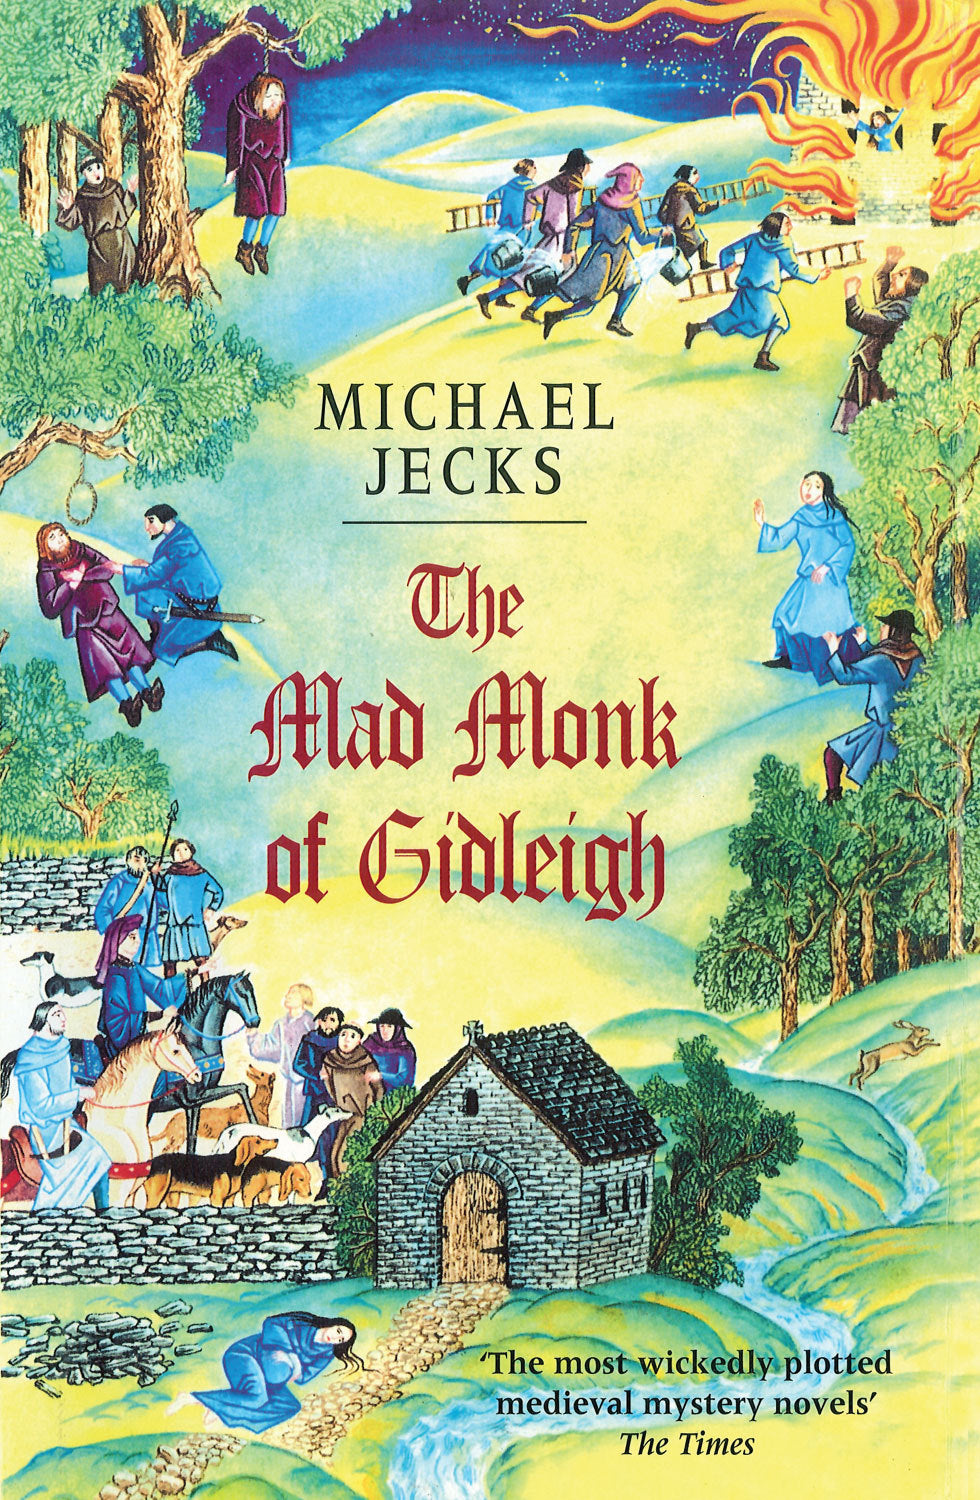 The Mad Monk Of Gidleigh